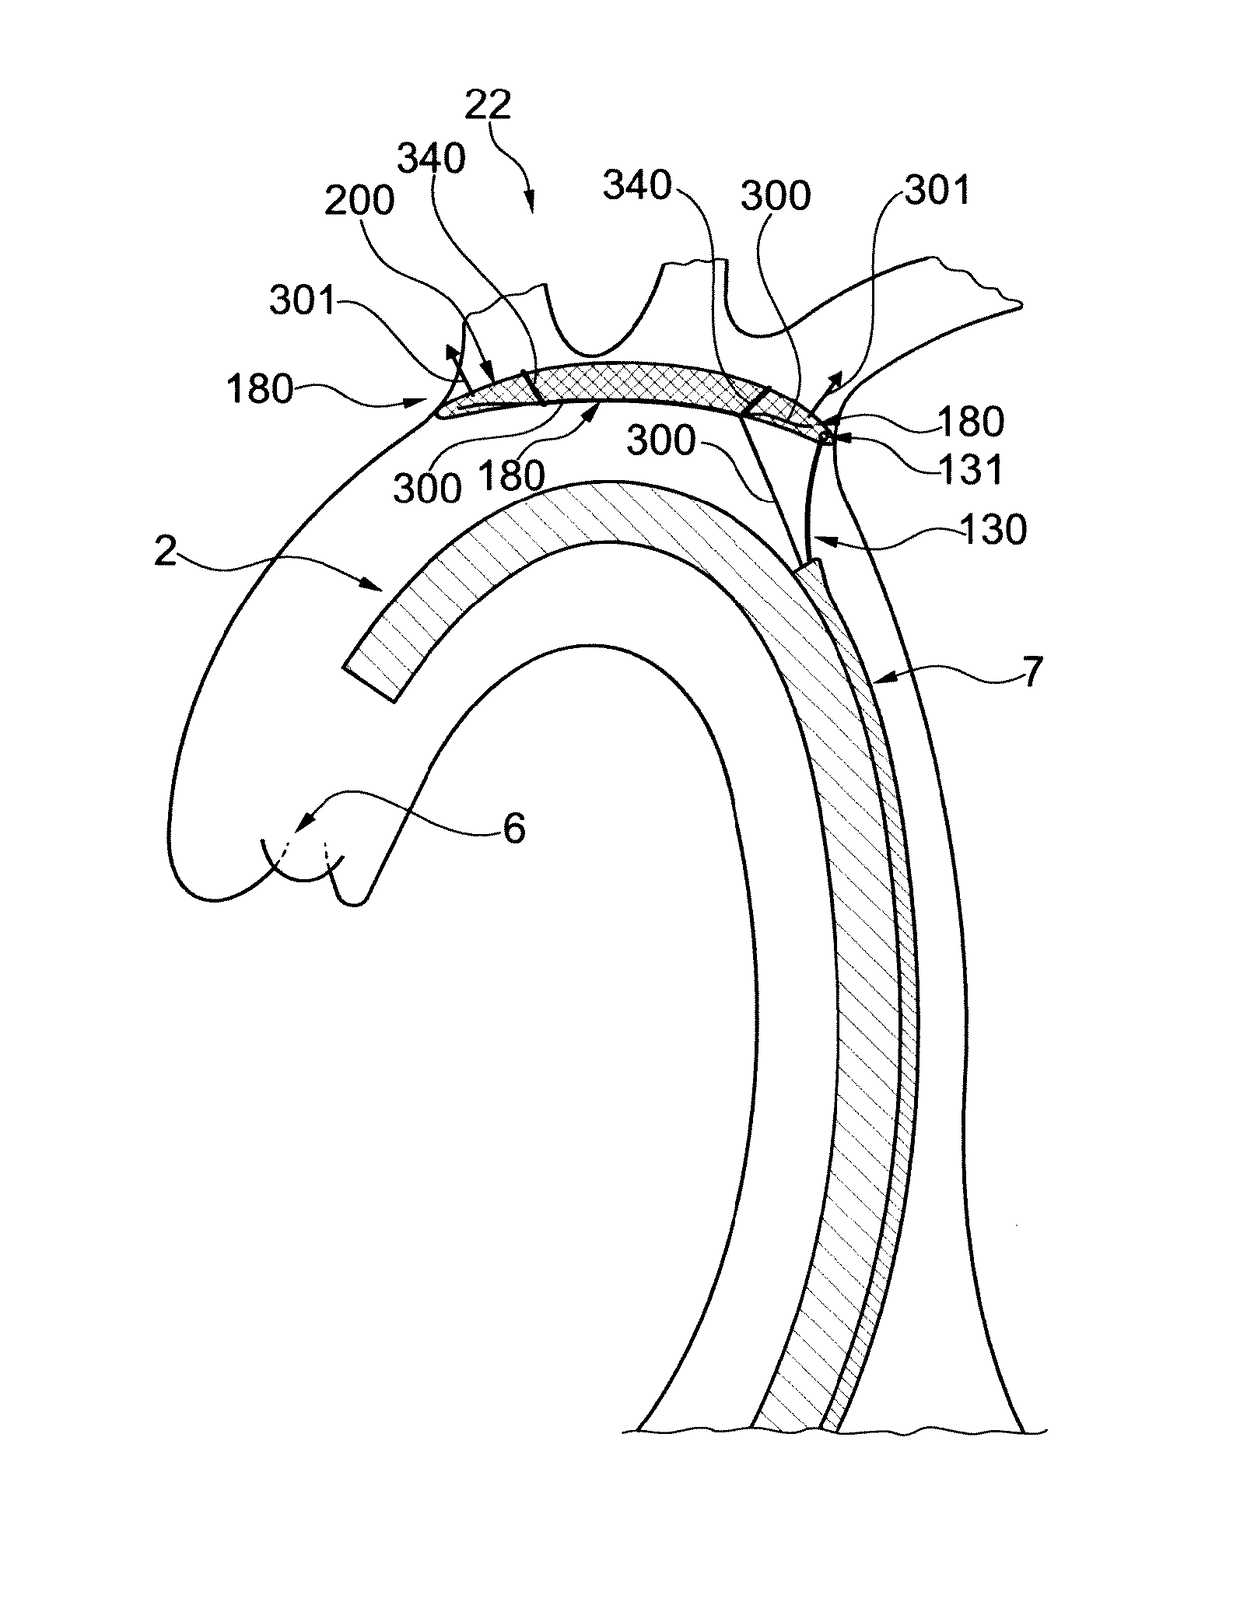 Embolic protection device and method